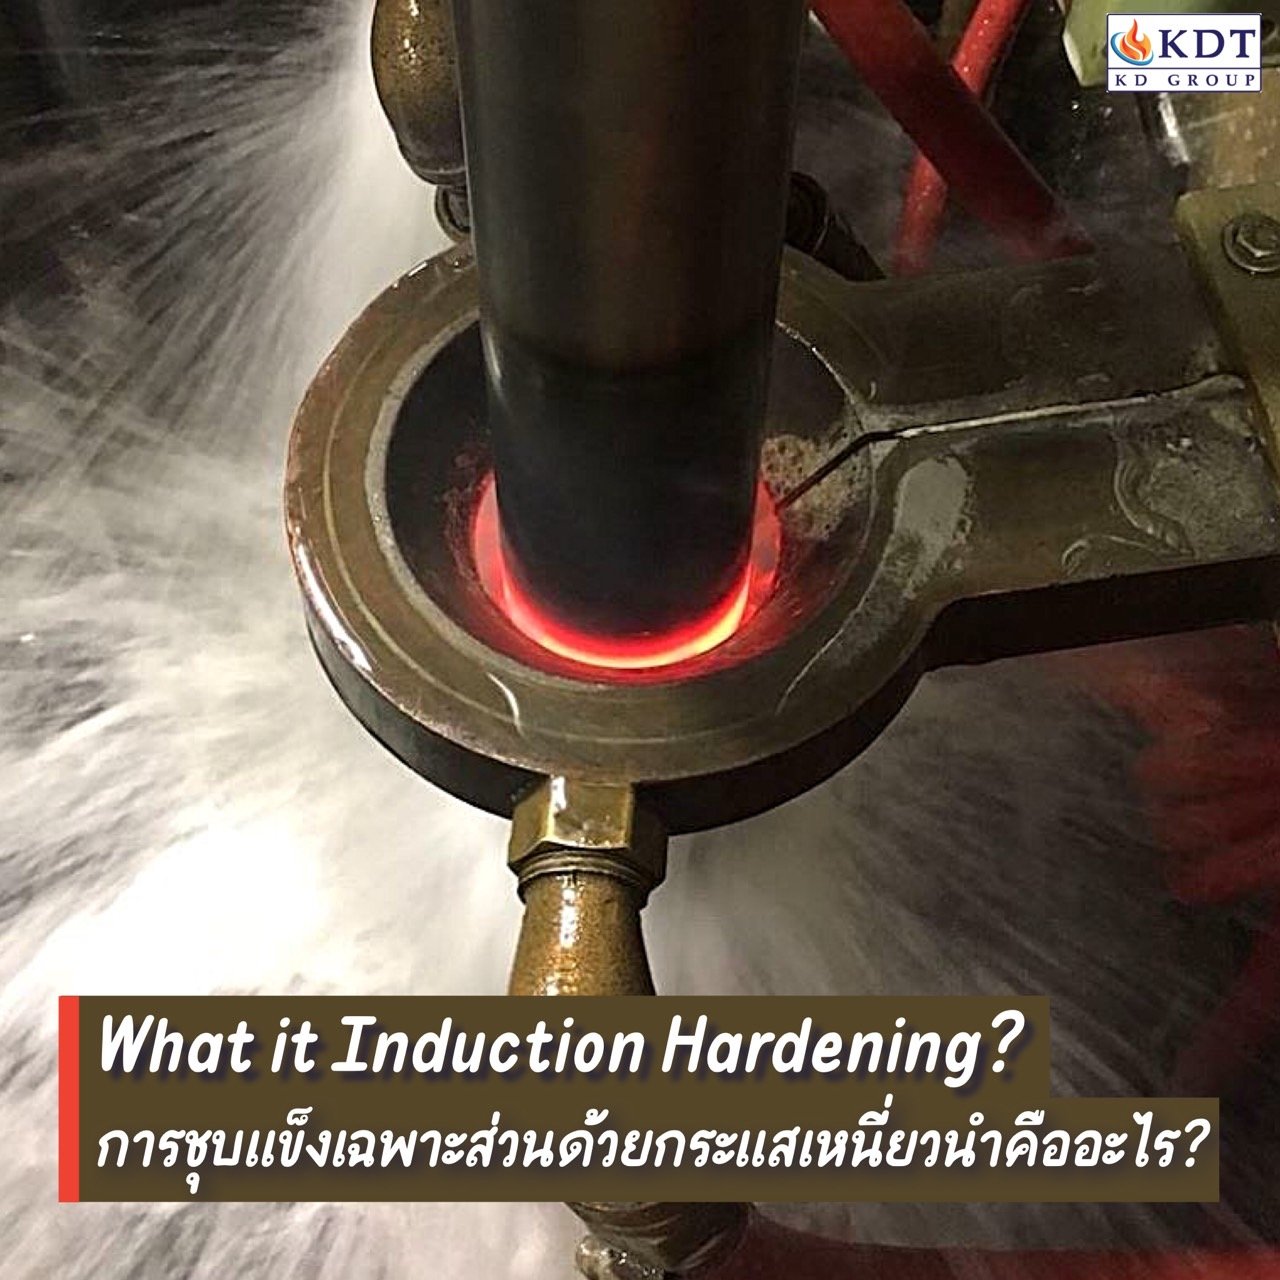 what is Induction hardening 